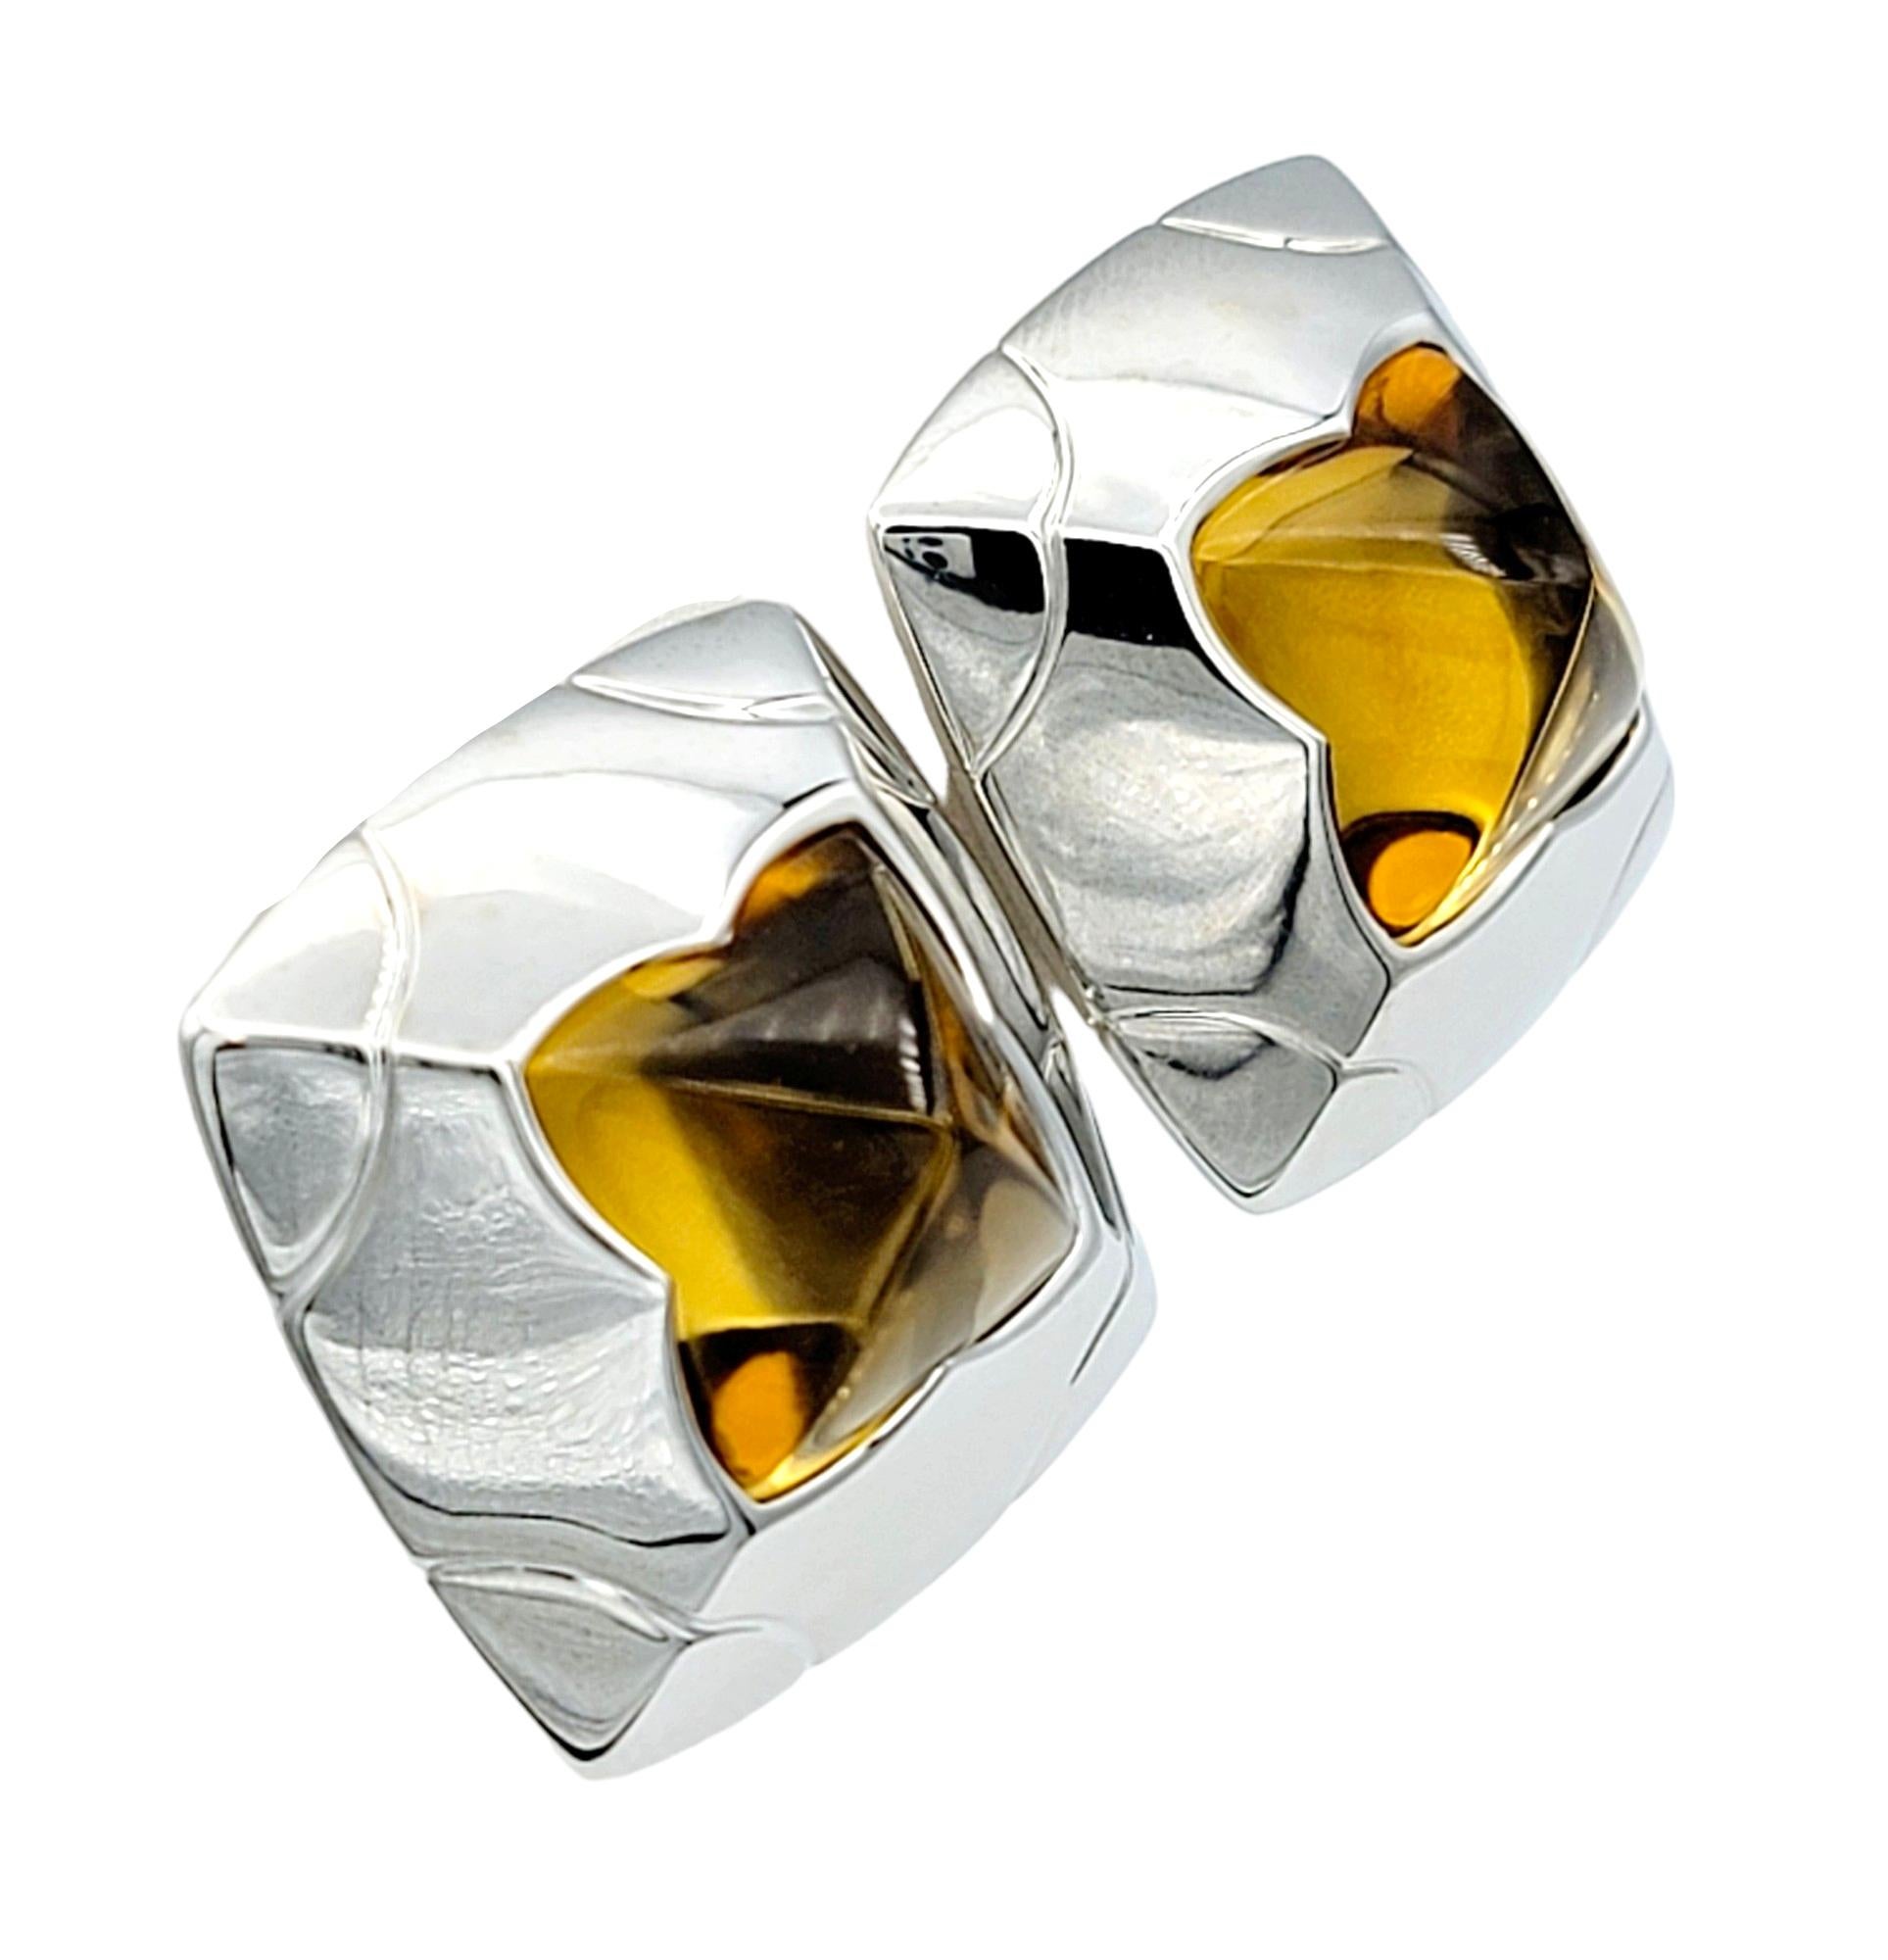 Cabochon Bvlgari Pyramid Citrine Non-Pierced Stud Style Earrings in 18 Karat White Gold For Sale